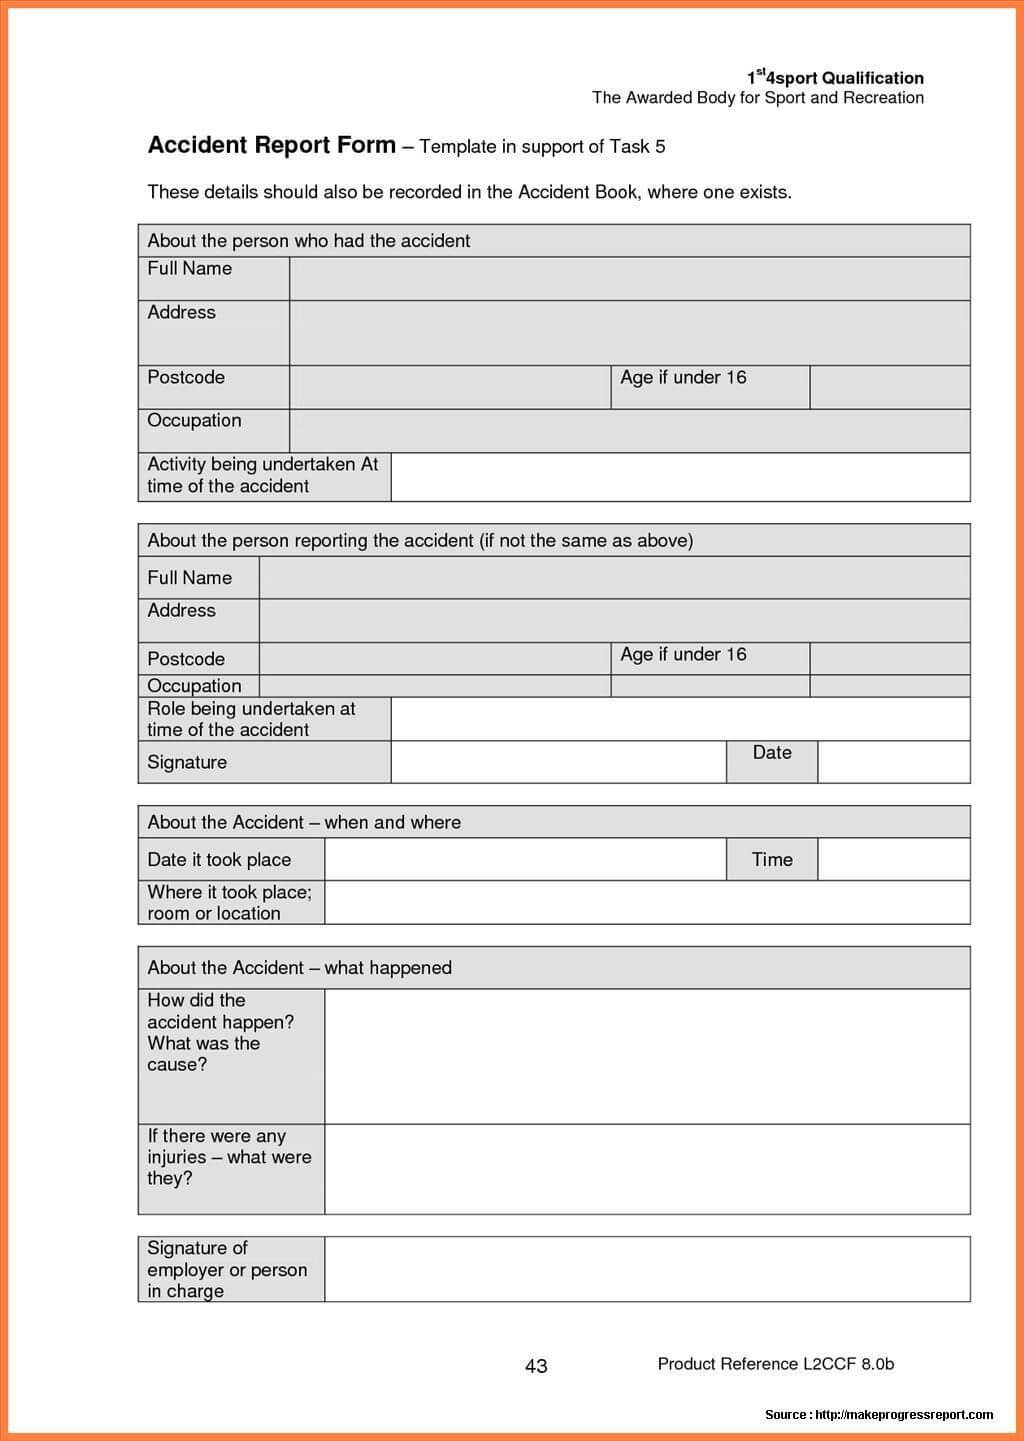 Construction Accident Report Form Sample | Incident Report Throughout Construction Accident Report Template